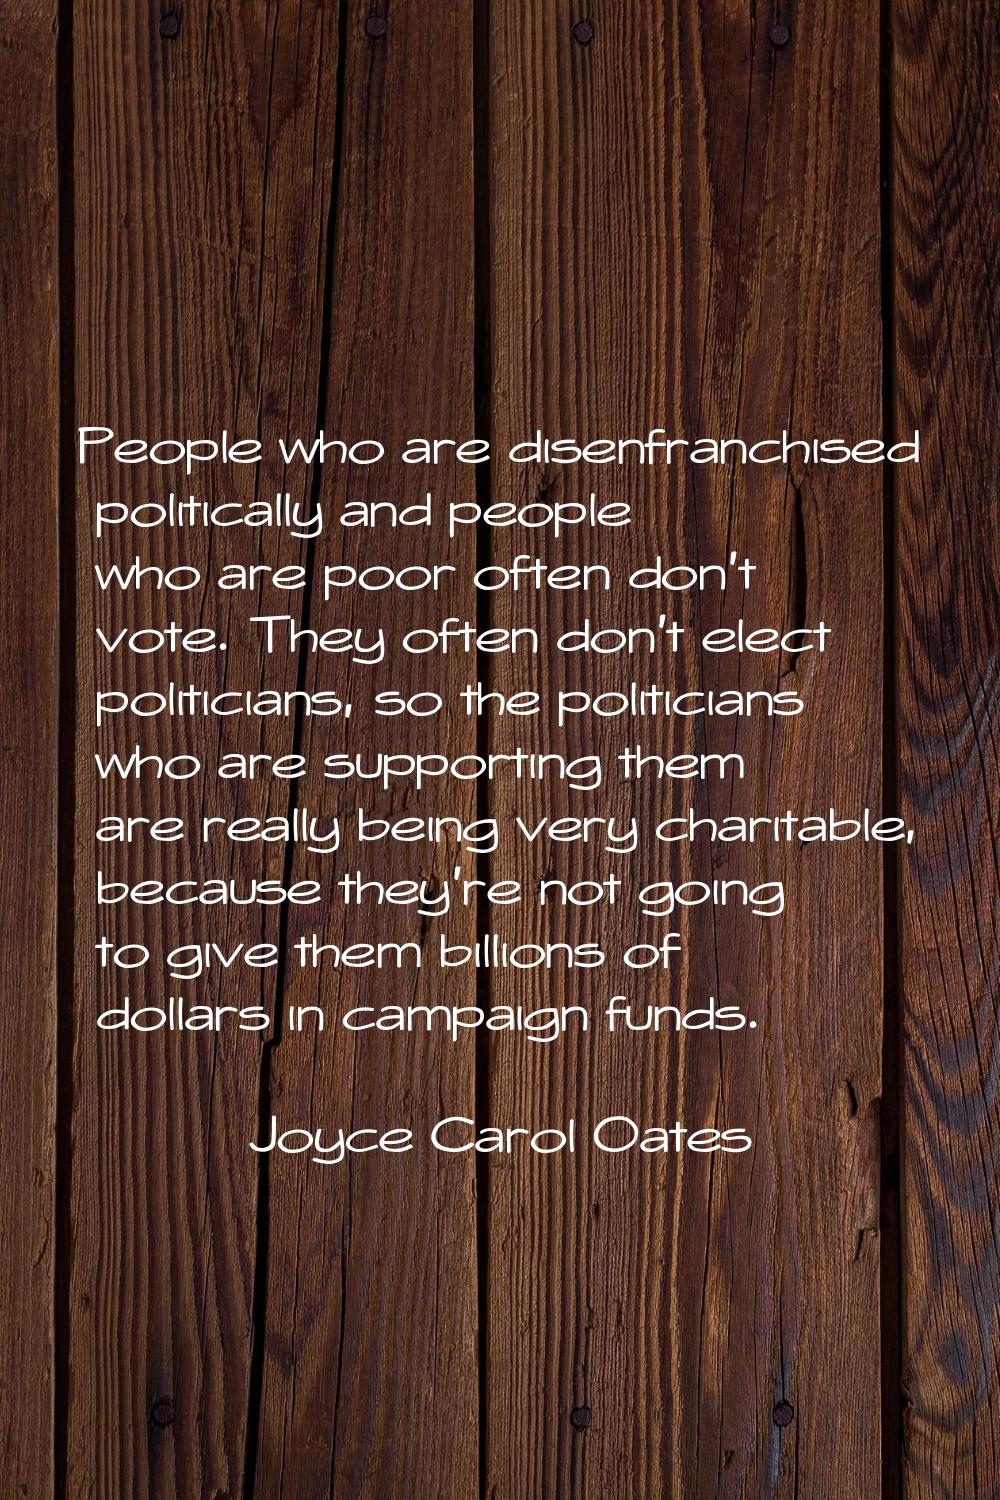 People who are disenfranchised politically and people who are poor often don't vote. They often don